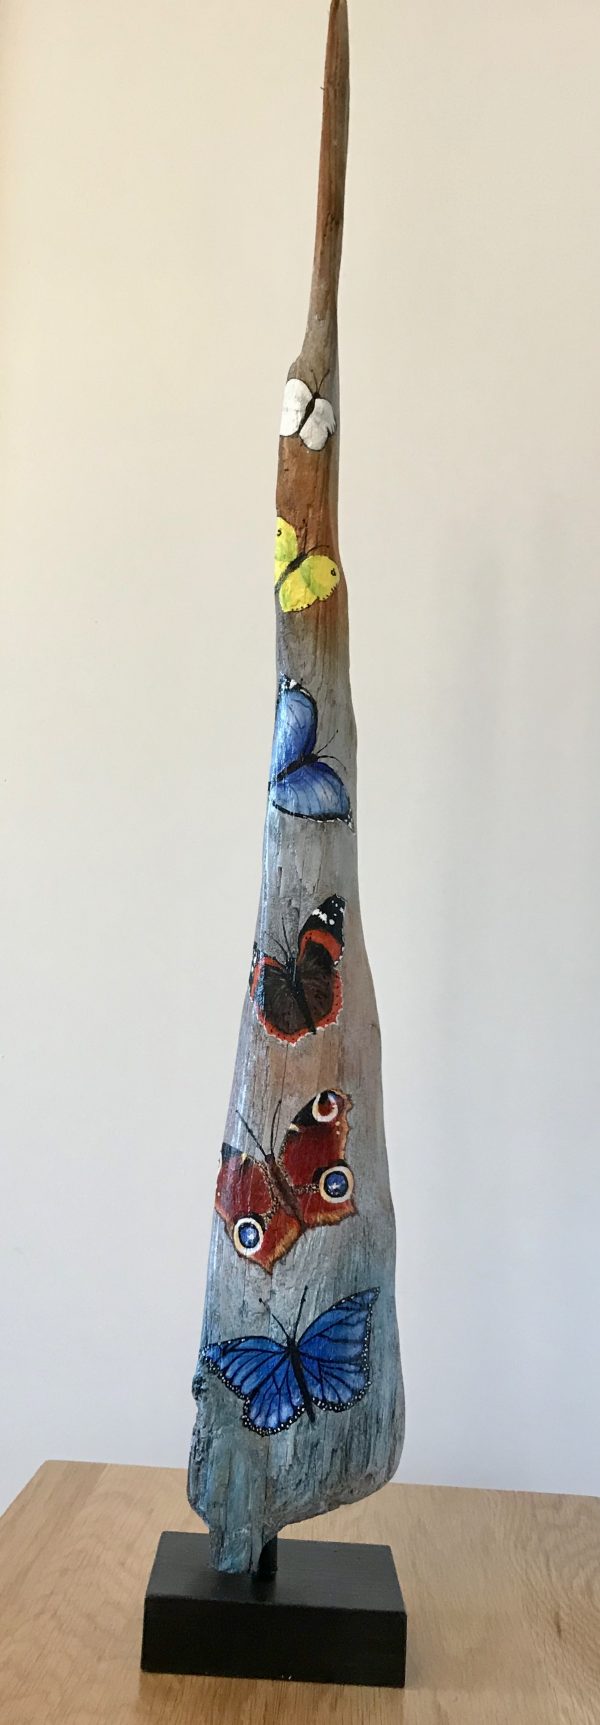 Driftwood with butterflies painted on